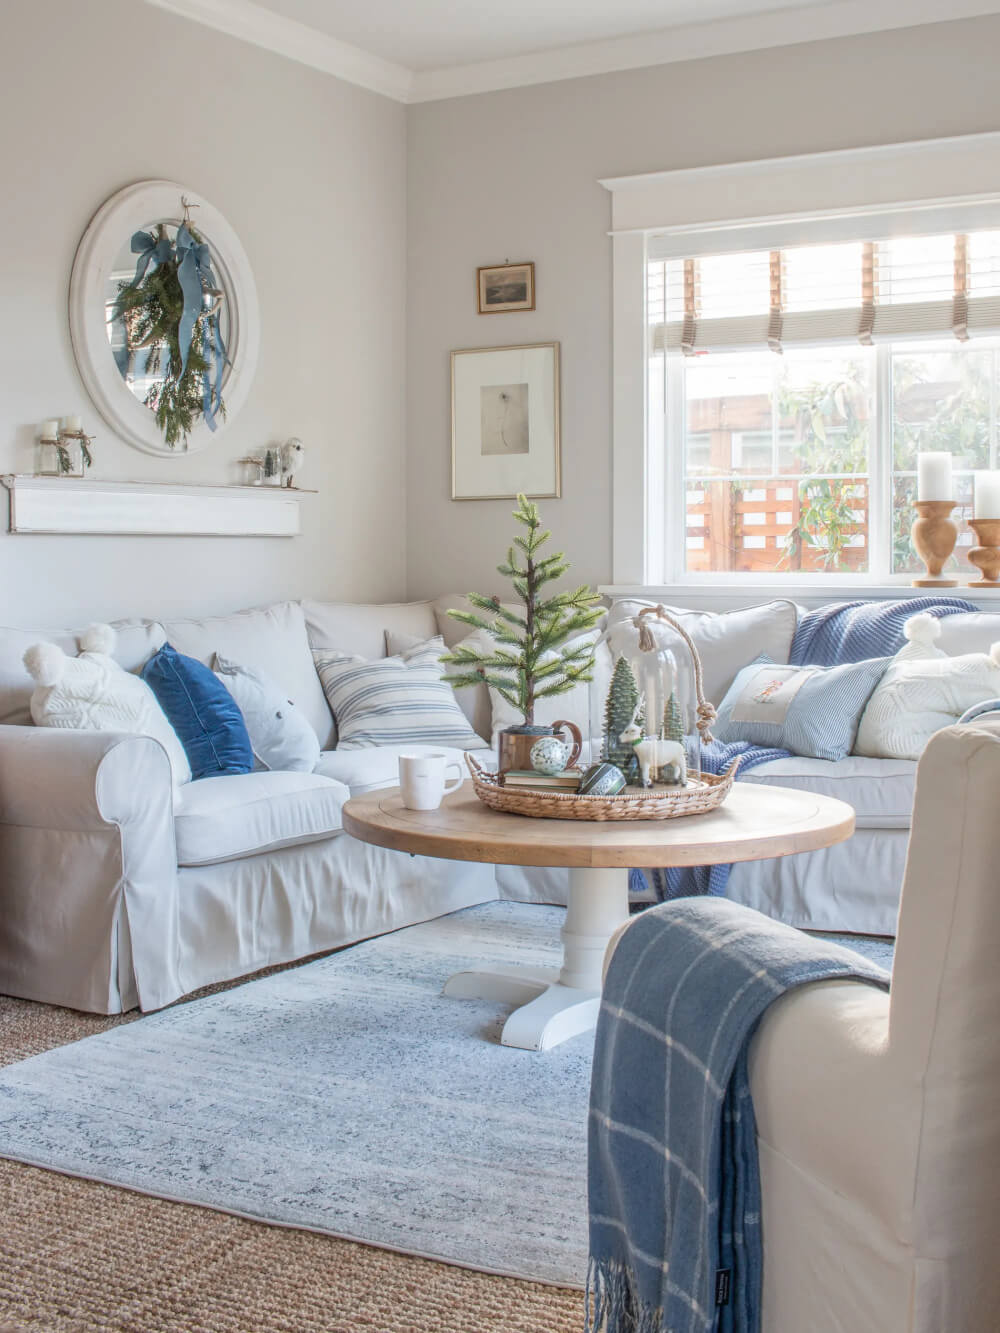 Blue and white pillows on a sectional surround a coffee table with a Christmas scene on top.